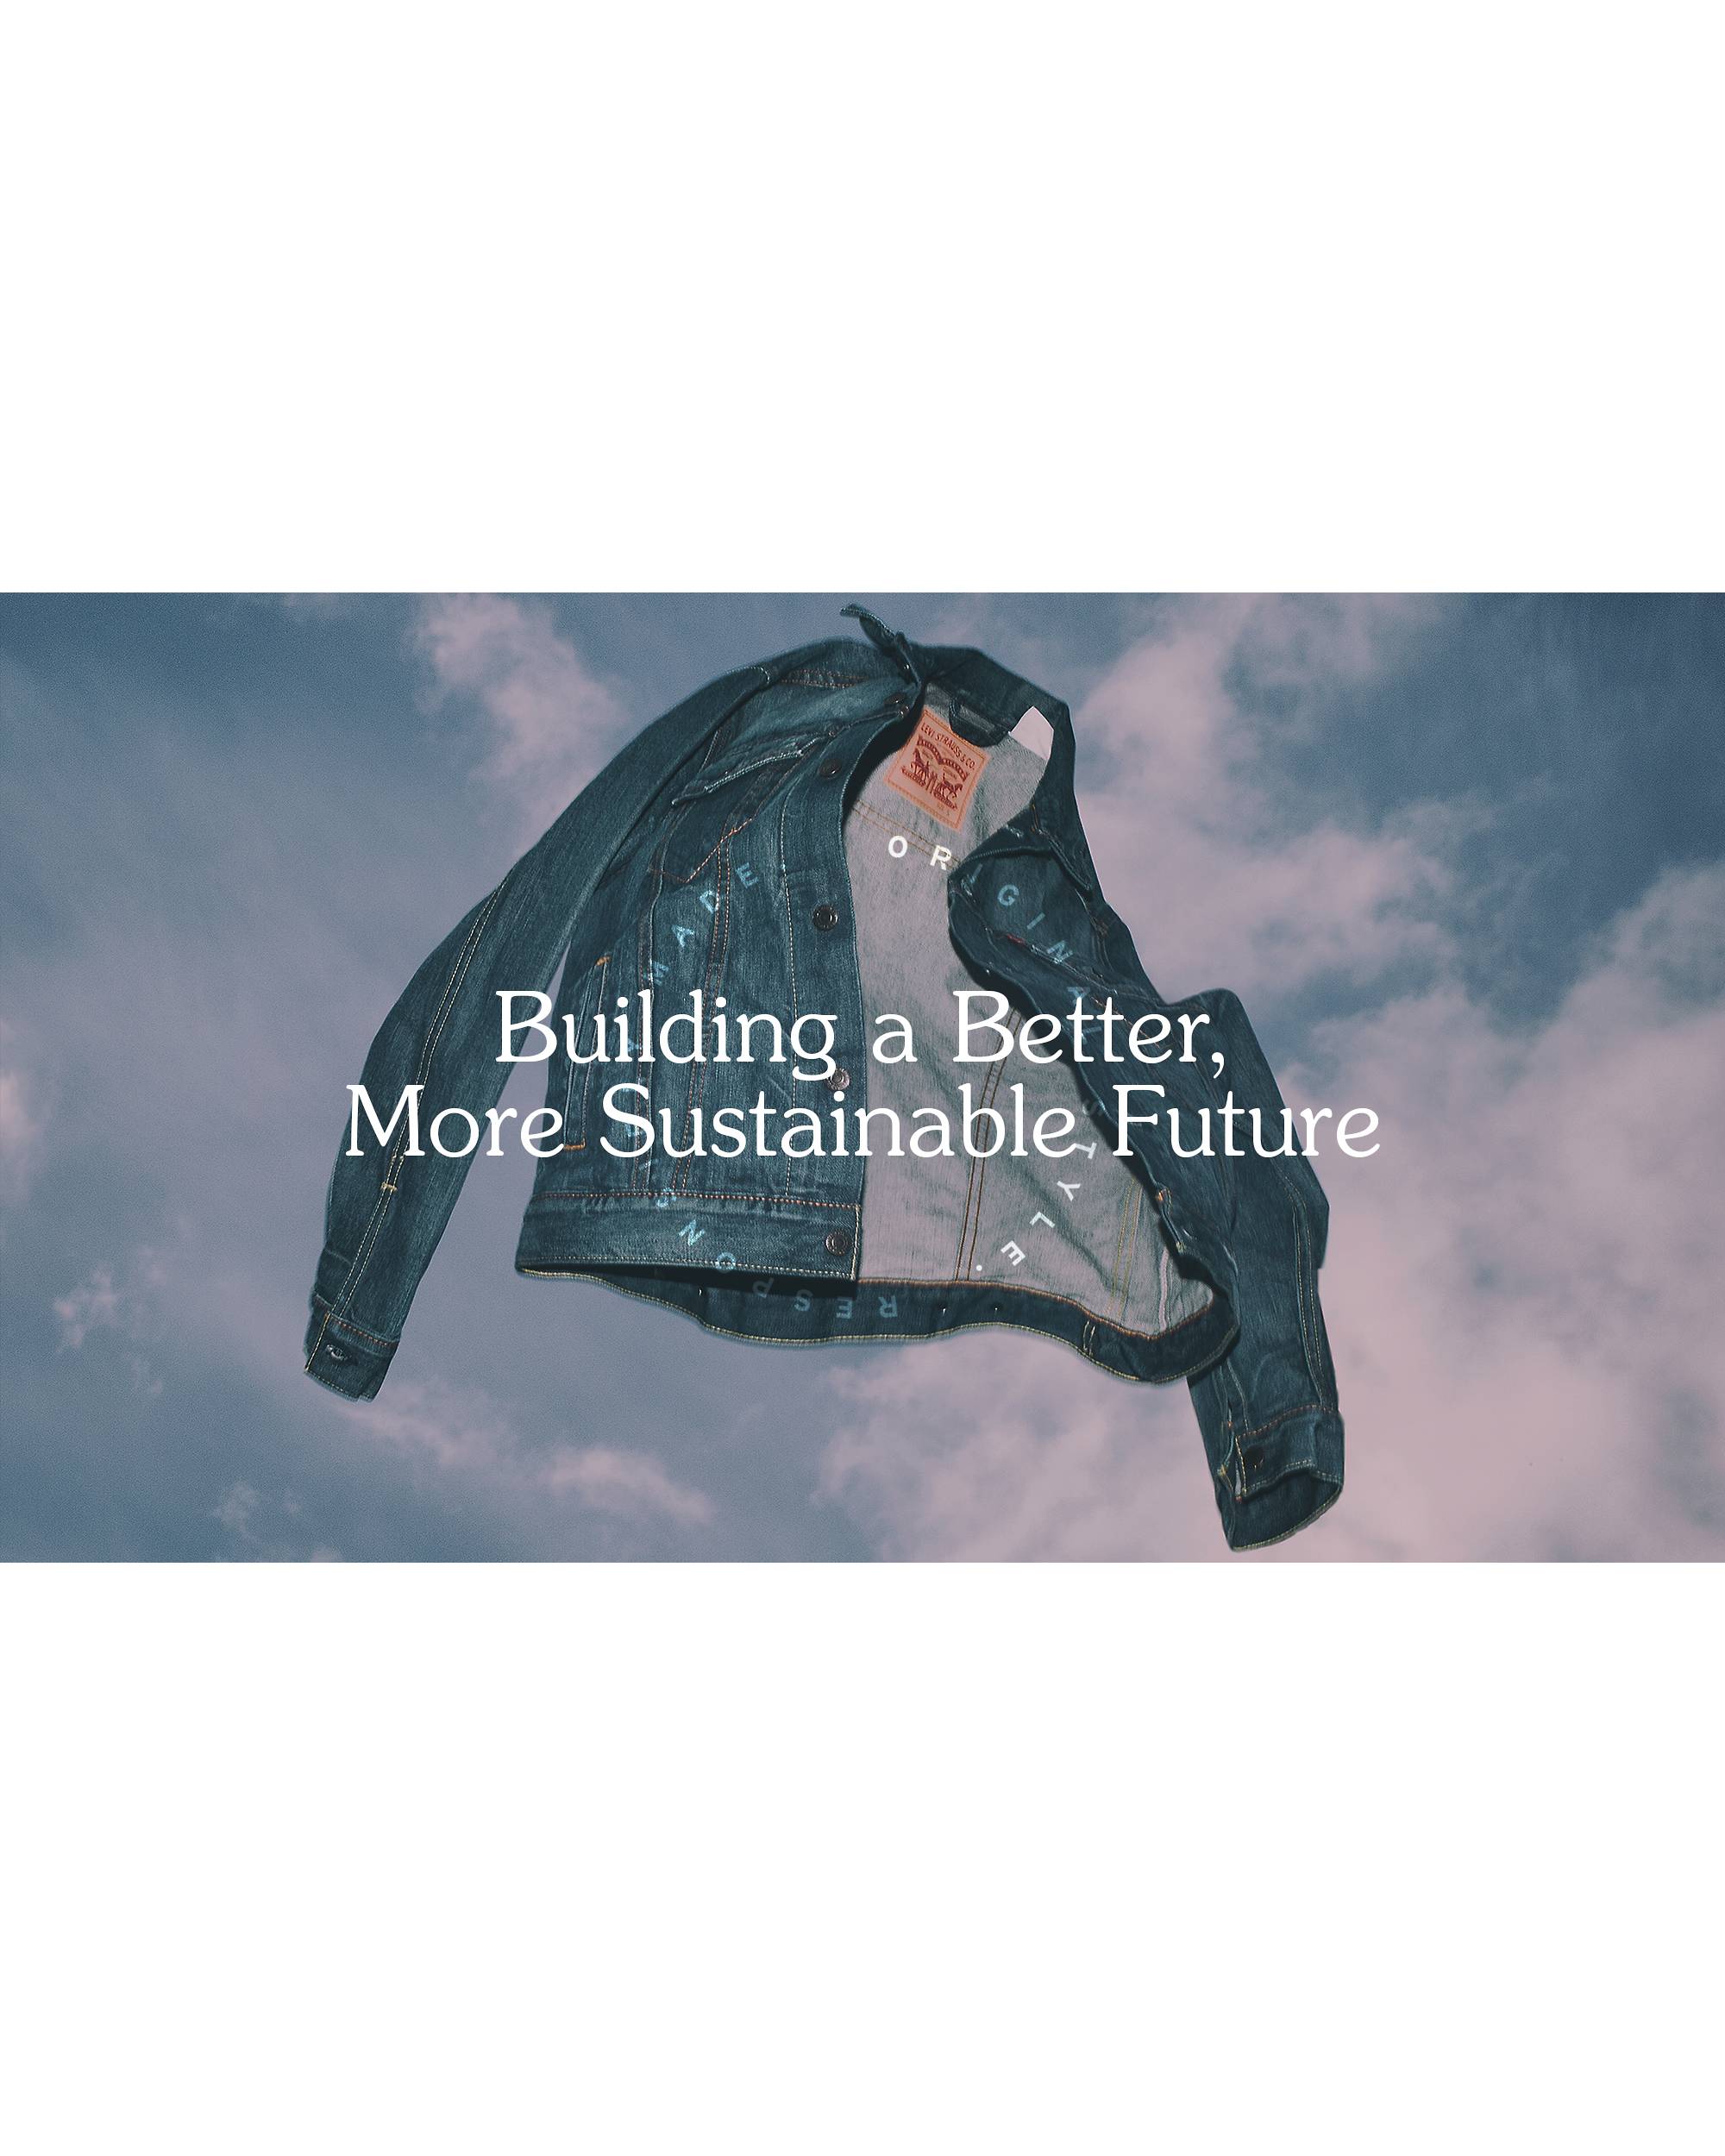 Building a Better, More Future